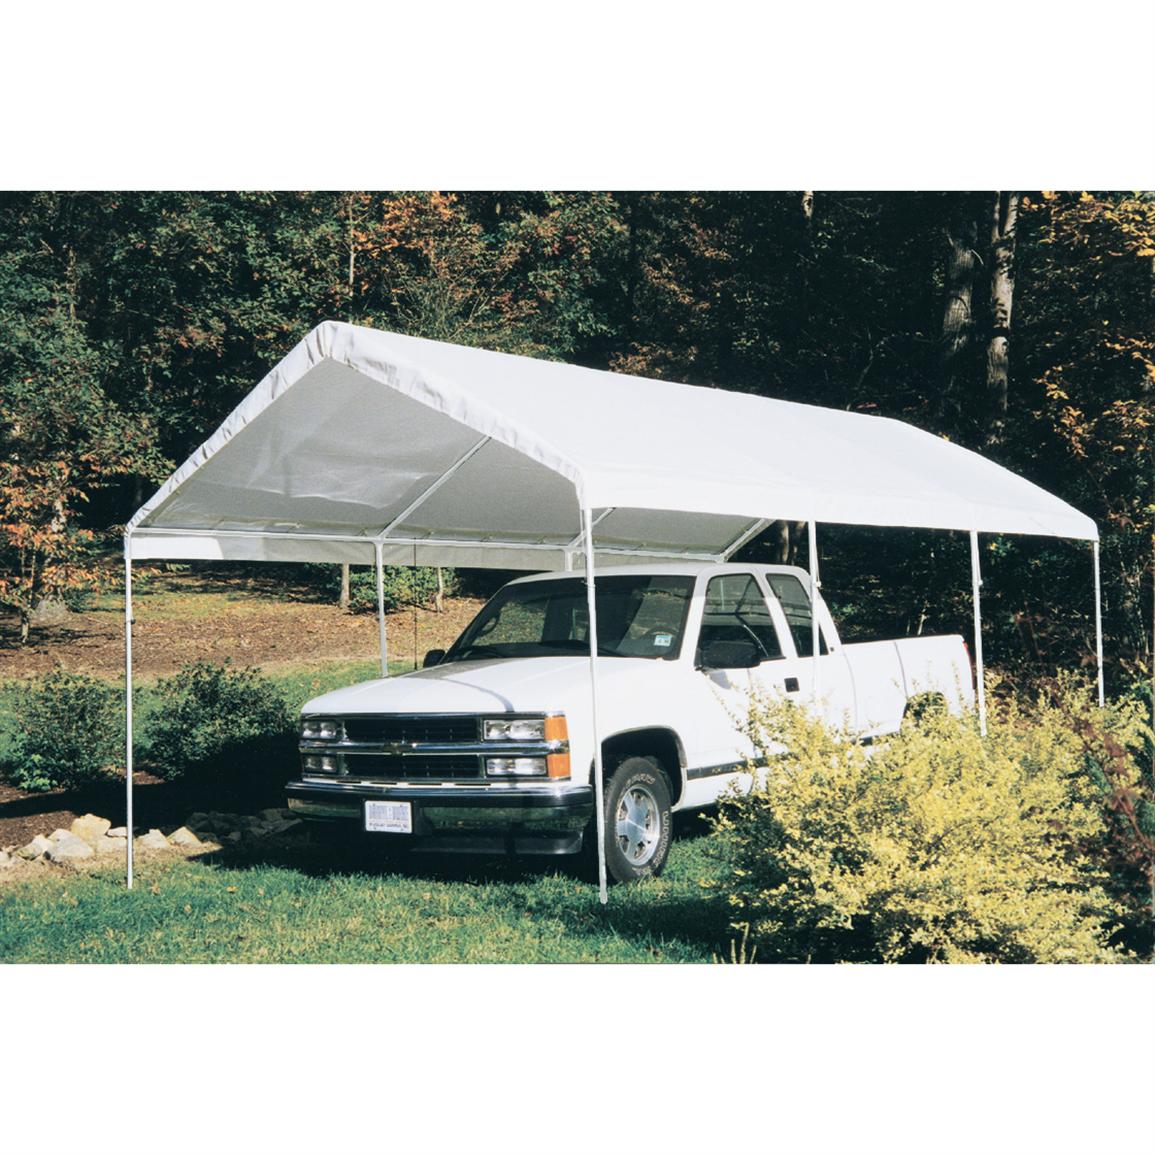 King Canopy 10 x 20' Universal Canopy, White - 93602 ...